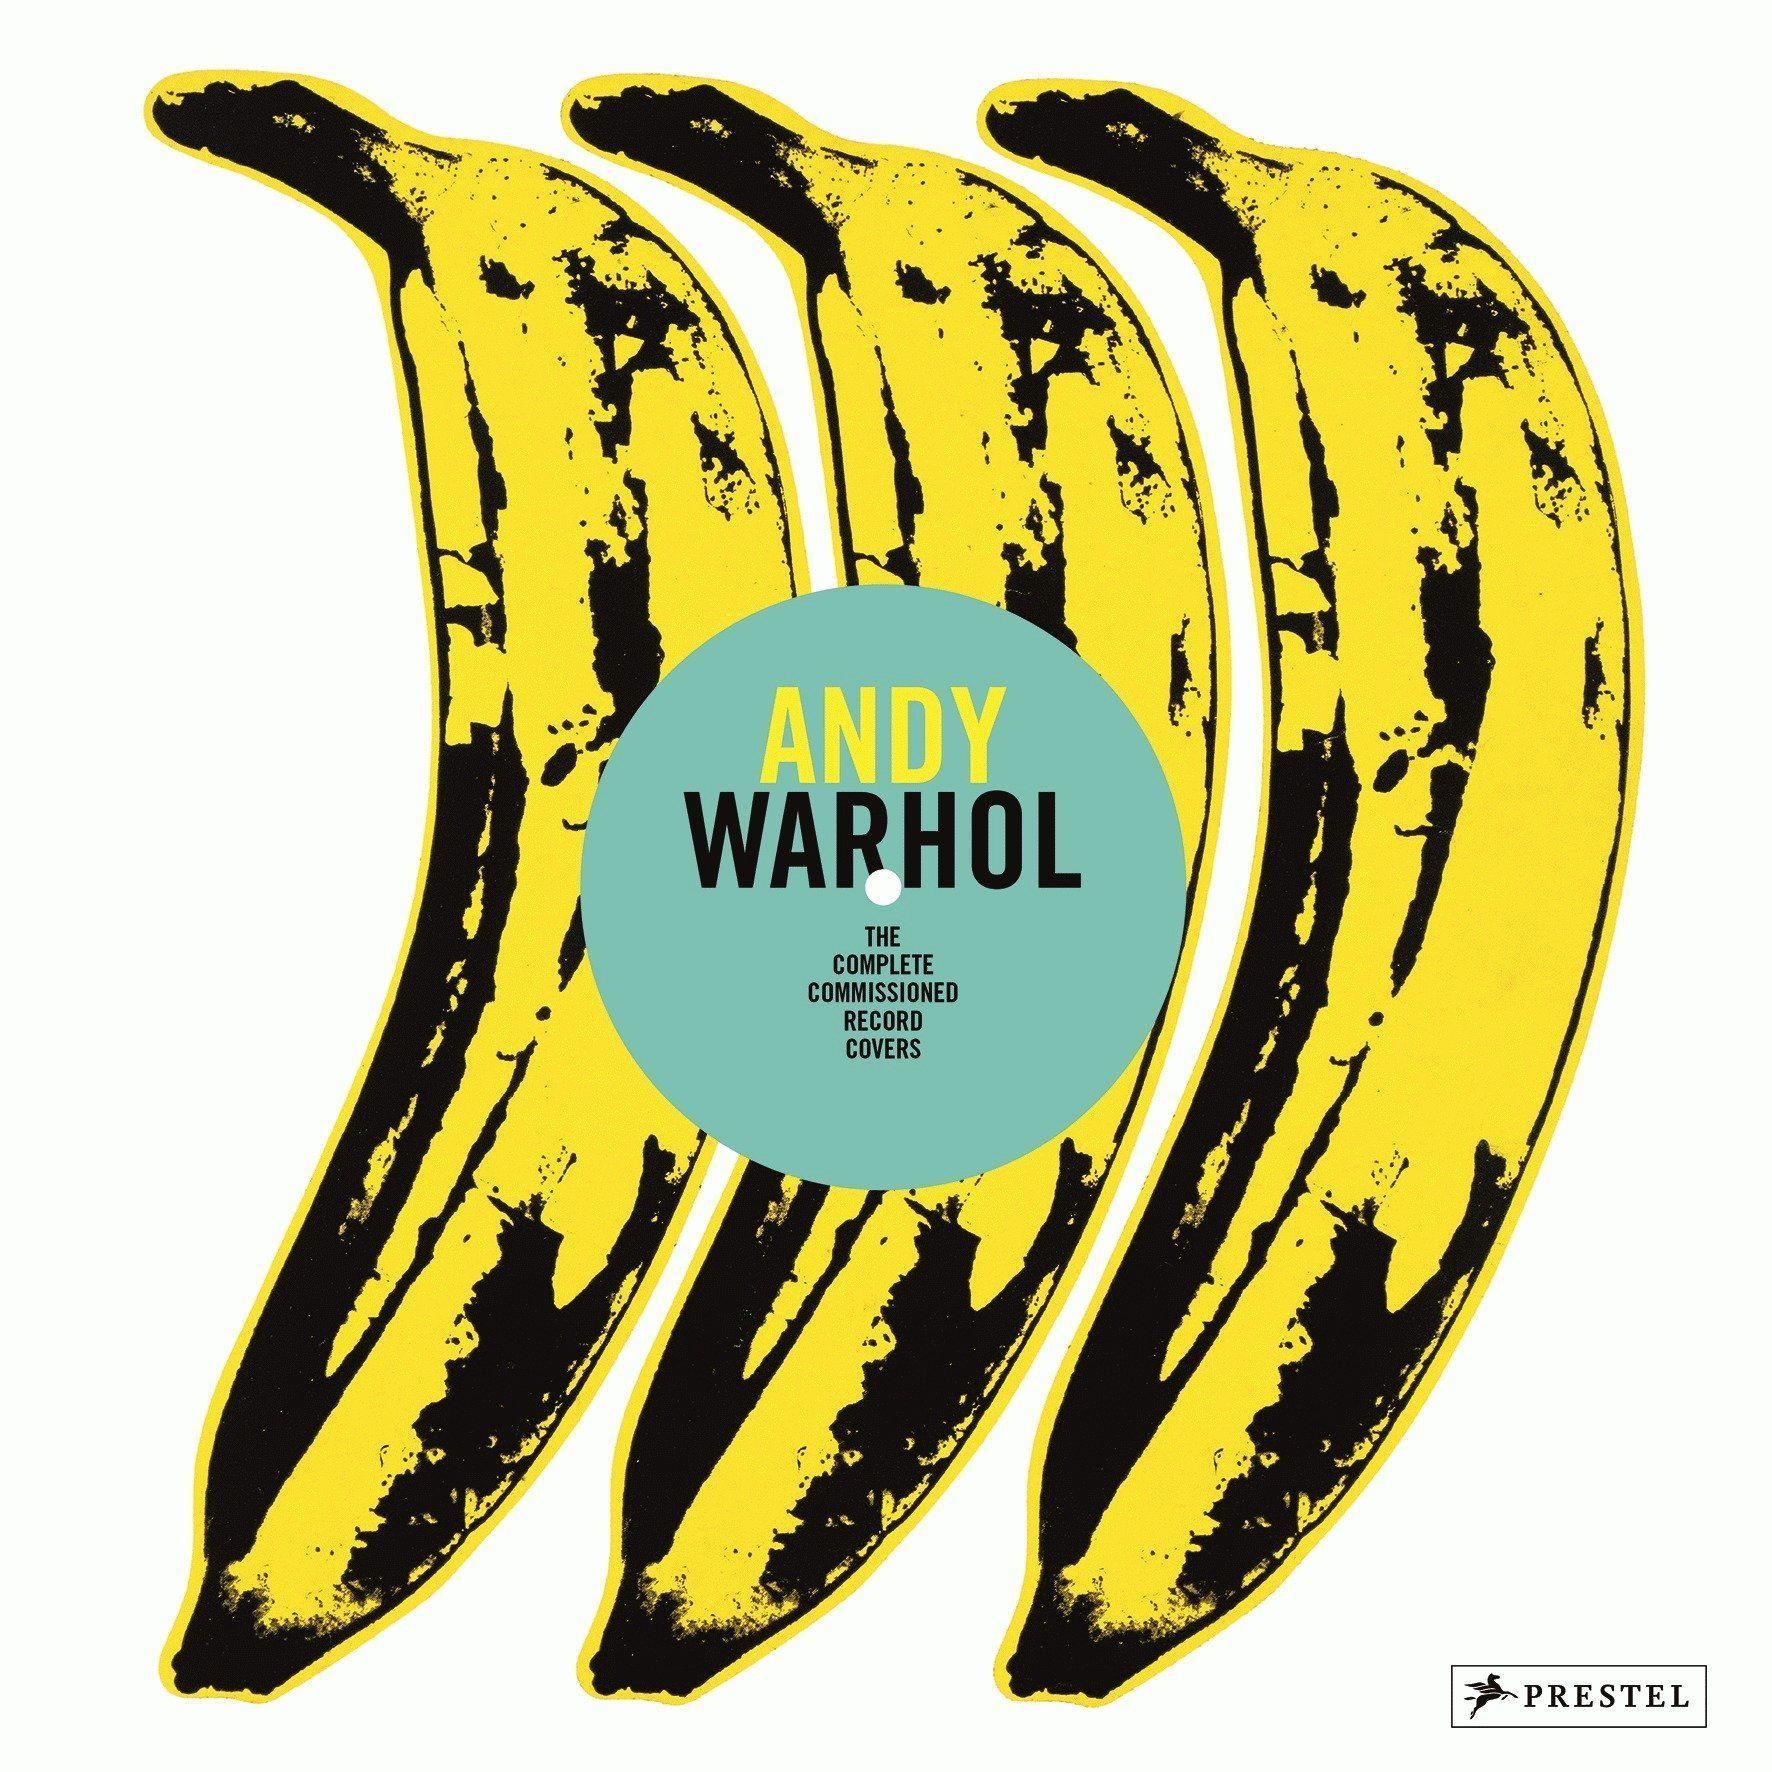 Andy Warhol Logo - Andy Warhol: The Complete Commissioned Record Covers: Paul Marechal ...